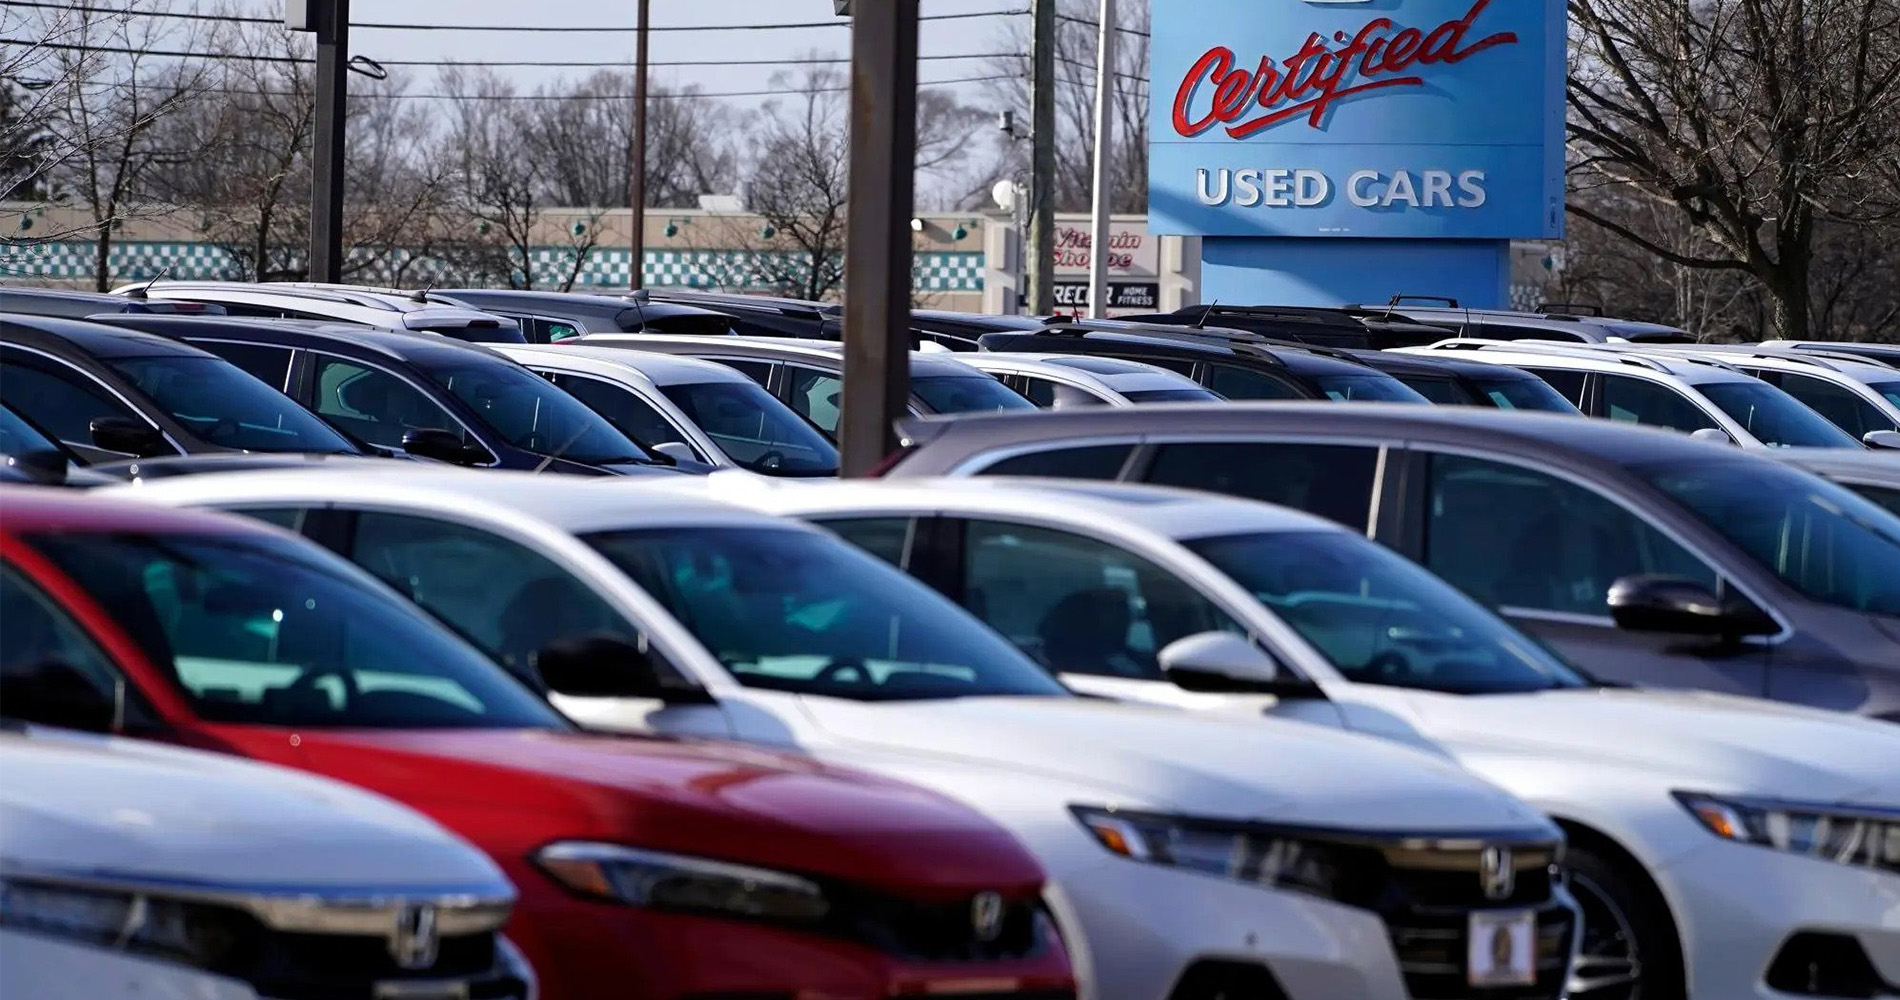 Used car lot in the U.S.